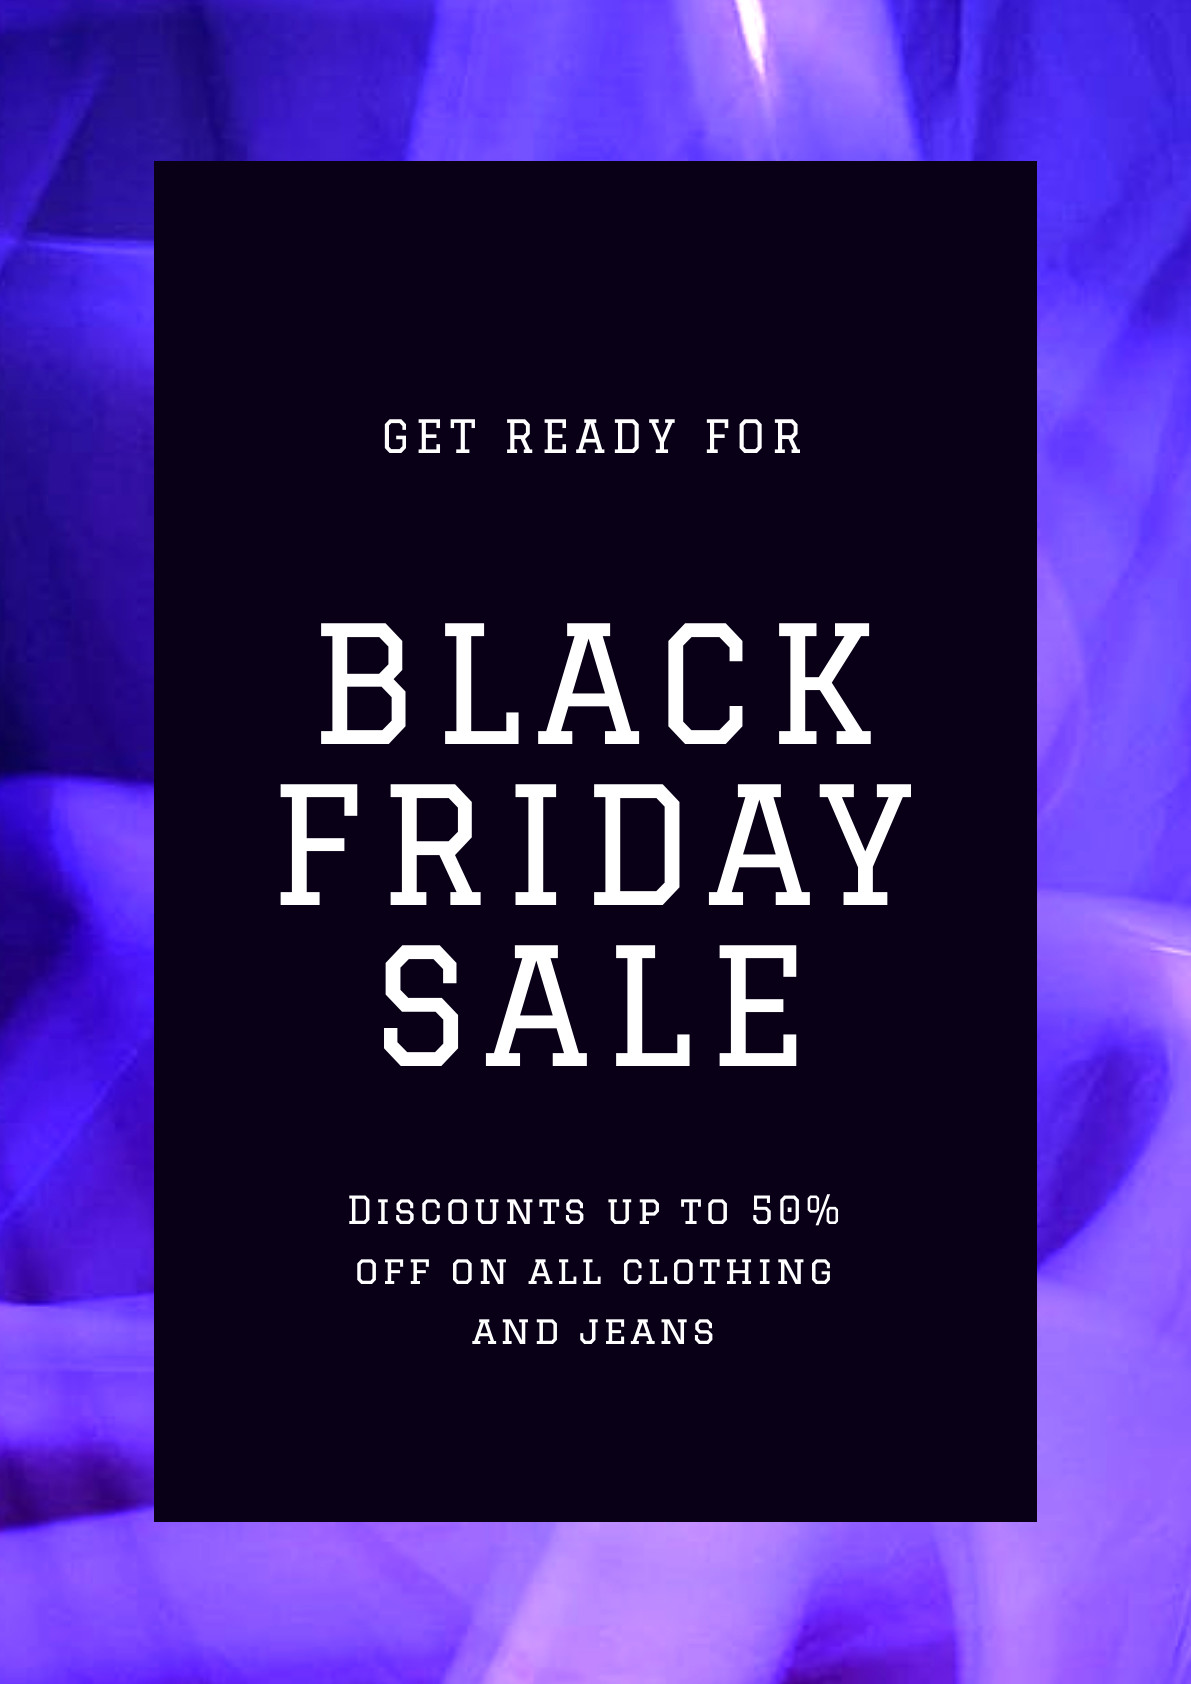 Black Friday Clothing and Jeans Poster 1191x1684